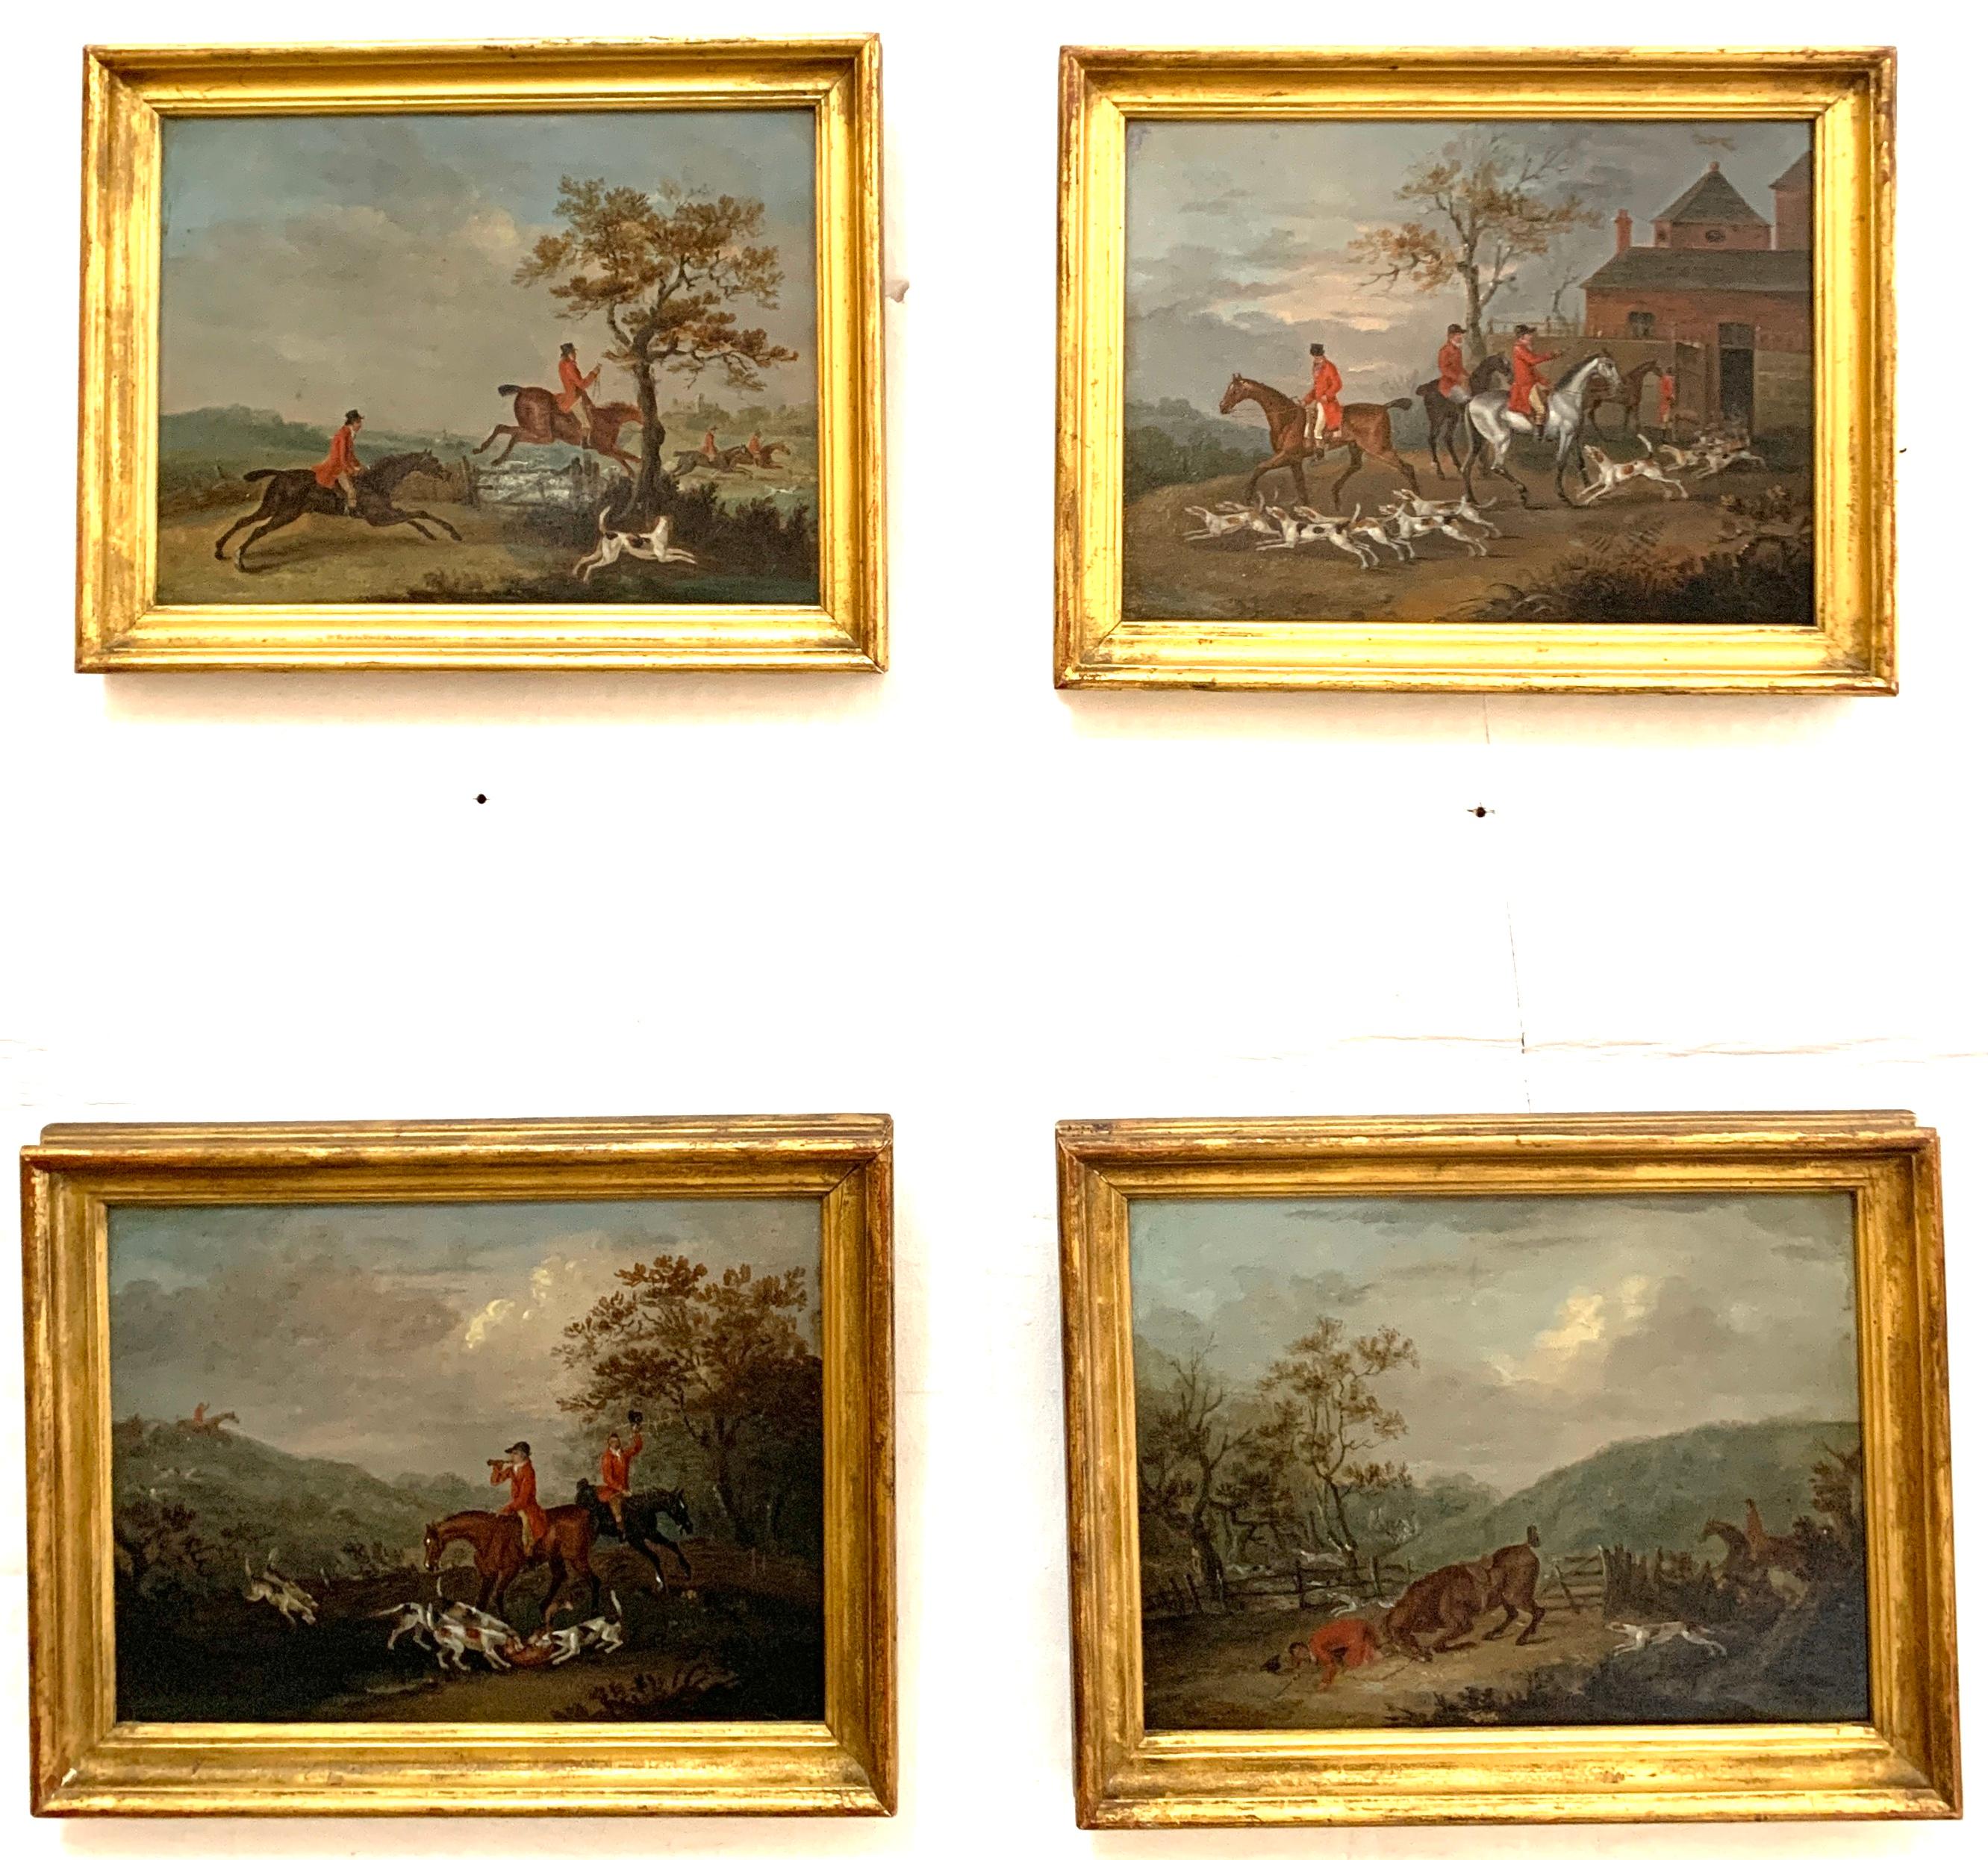 John Nost Sartorius Animal Painting - Set of 4 early 19th century Fox hunting landscape with men in red upon horseback